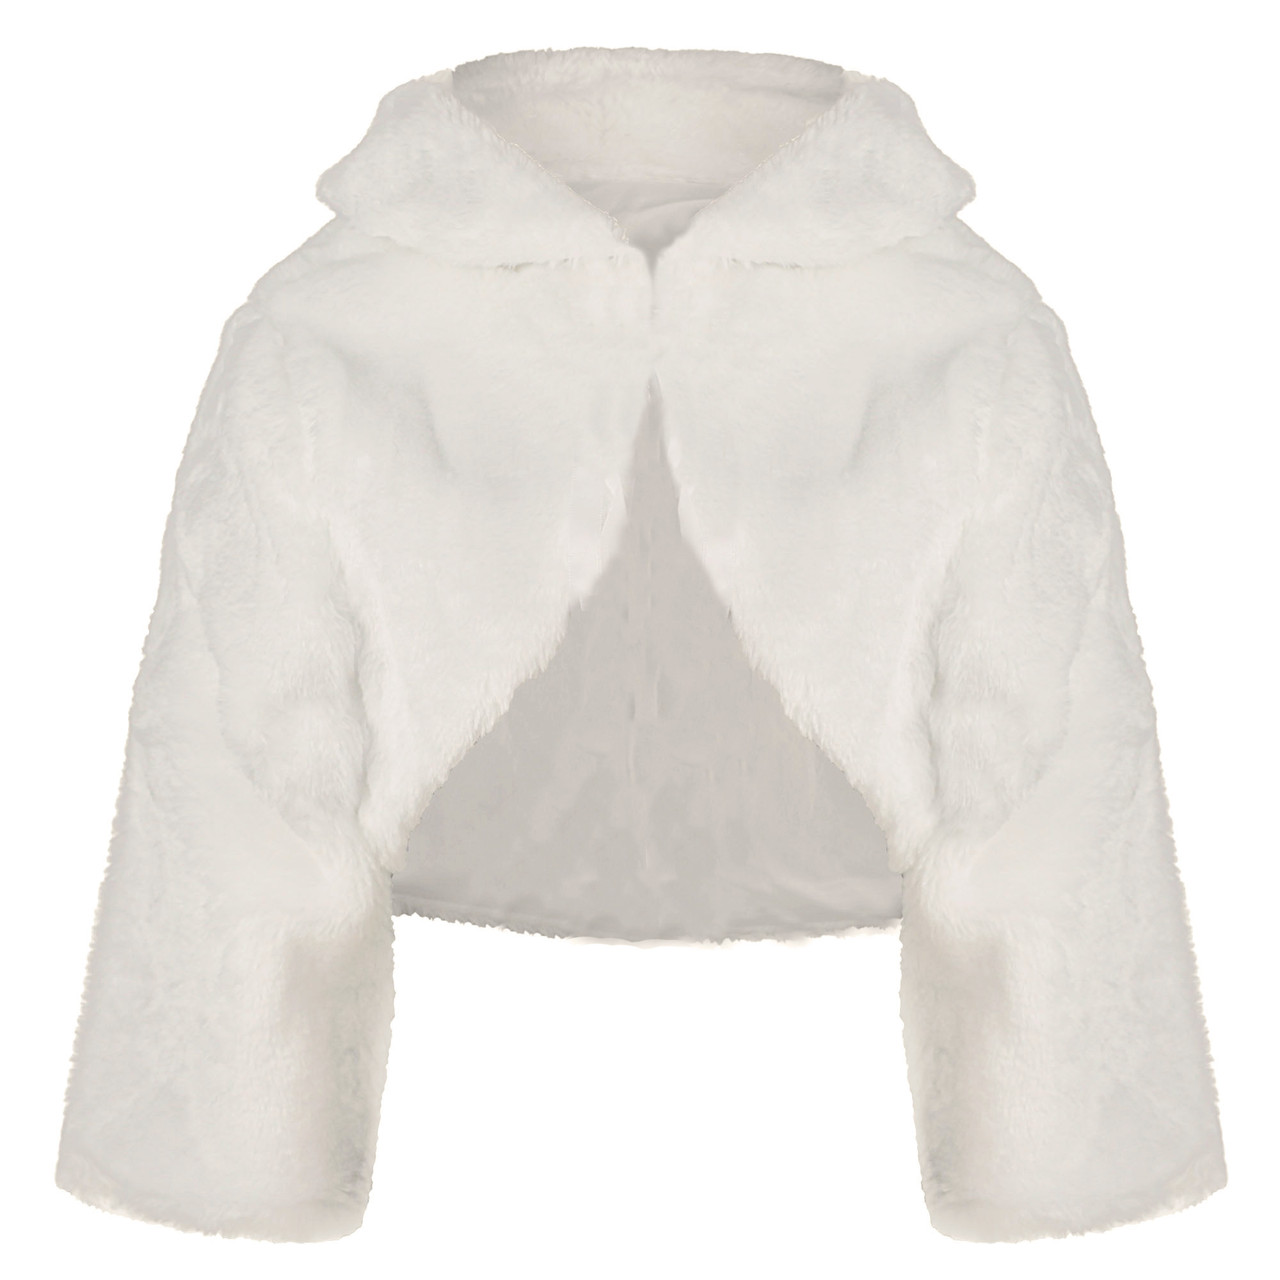 Buy Girls Full sleeves fluffy jacket - Cream Online at Best Price |  Mothercare India